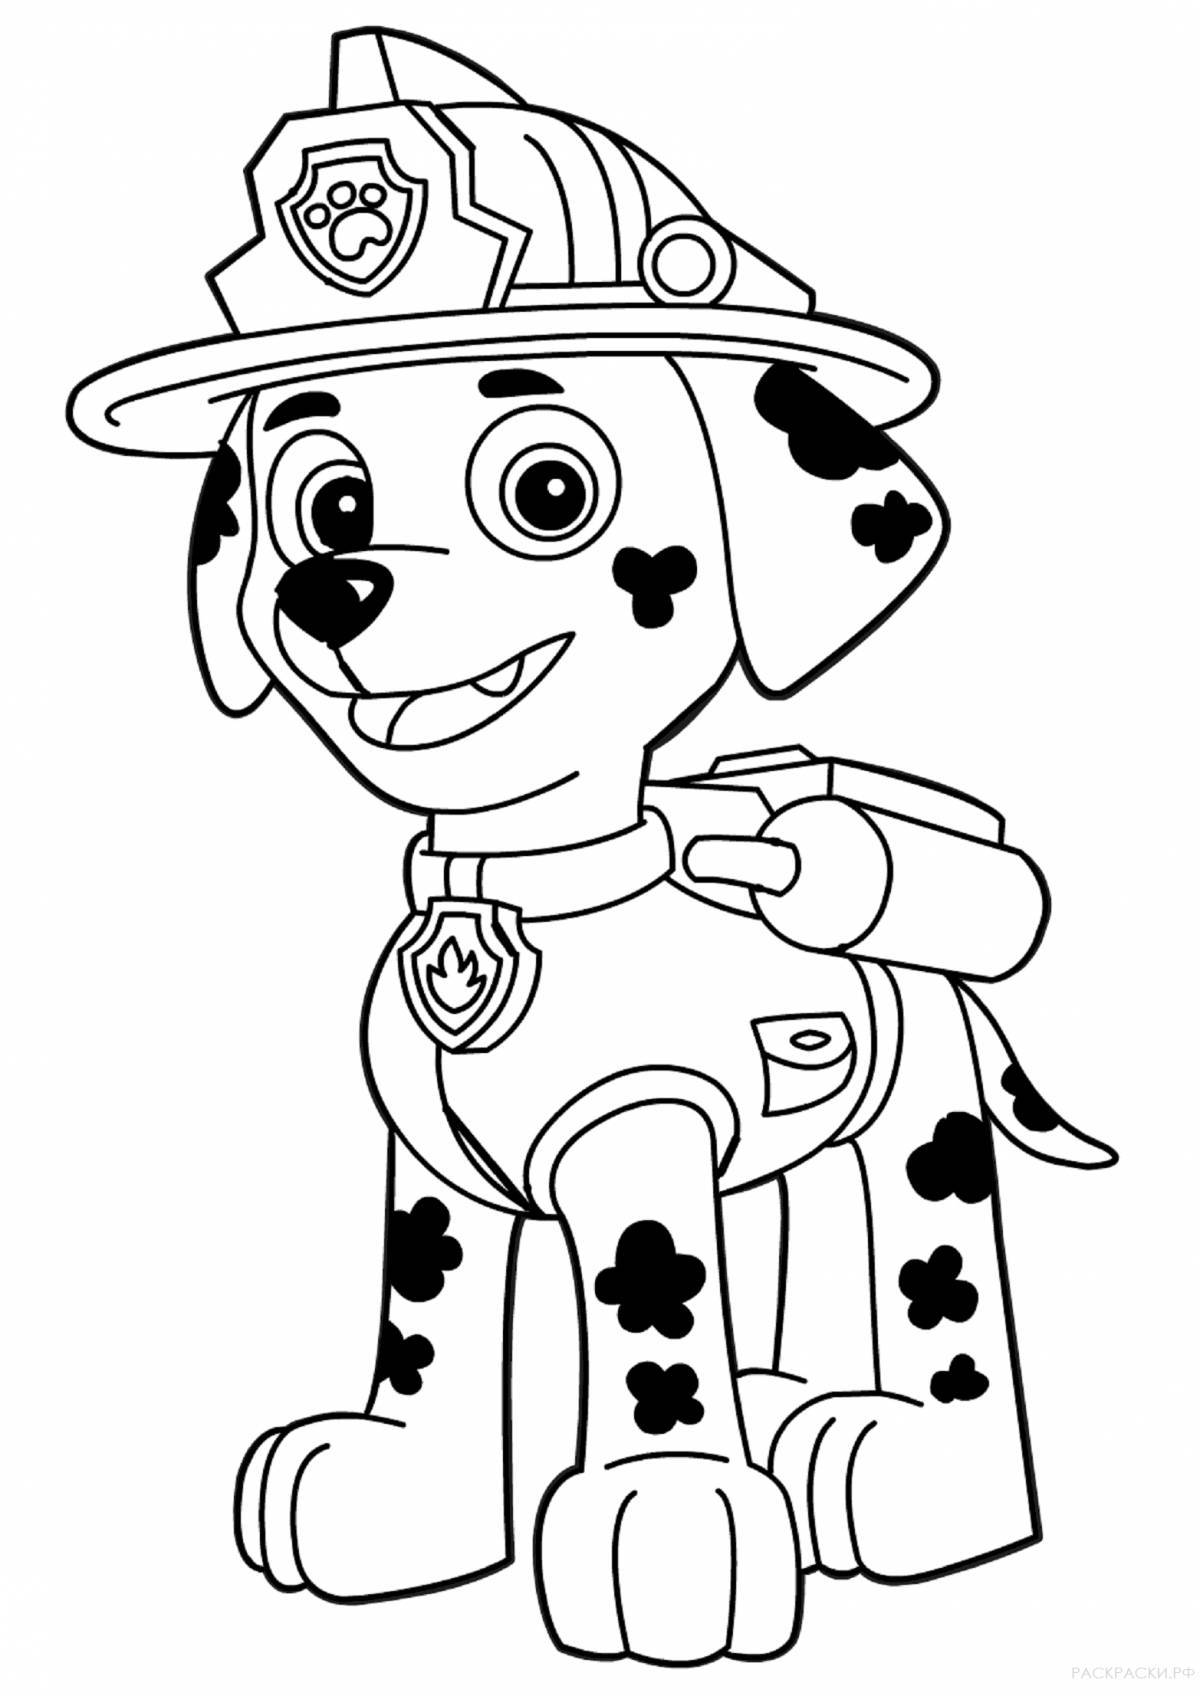 Coloring pages paw patrol pictures